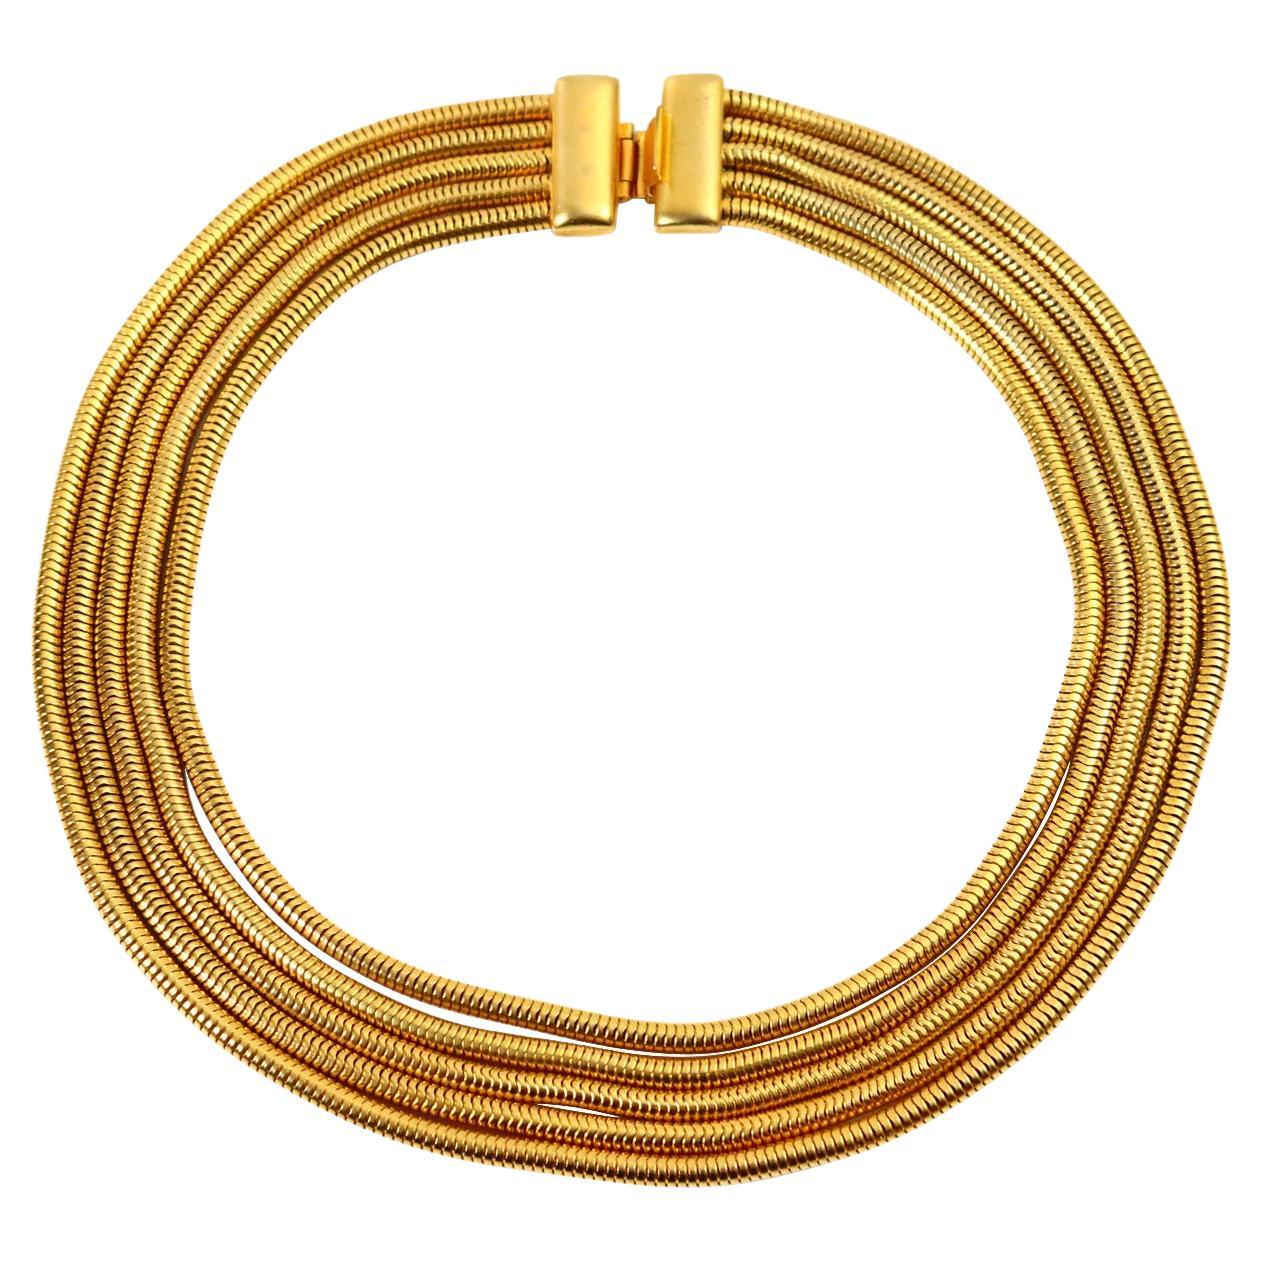 Vintage Gold 5 Strand Graduated Snake Chain Circa 1990s. A very classic snake chain necklace that can be dressed up or down.  There is a bracelet on site that matches this piece. This is a piece that will always elevate your wardrobe. Looks like